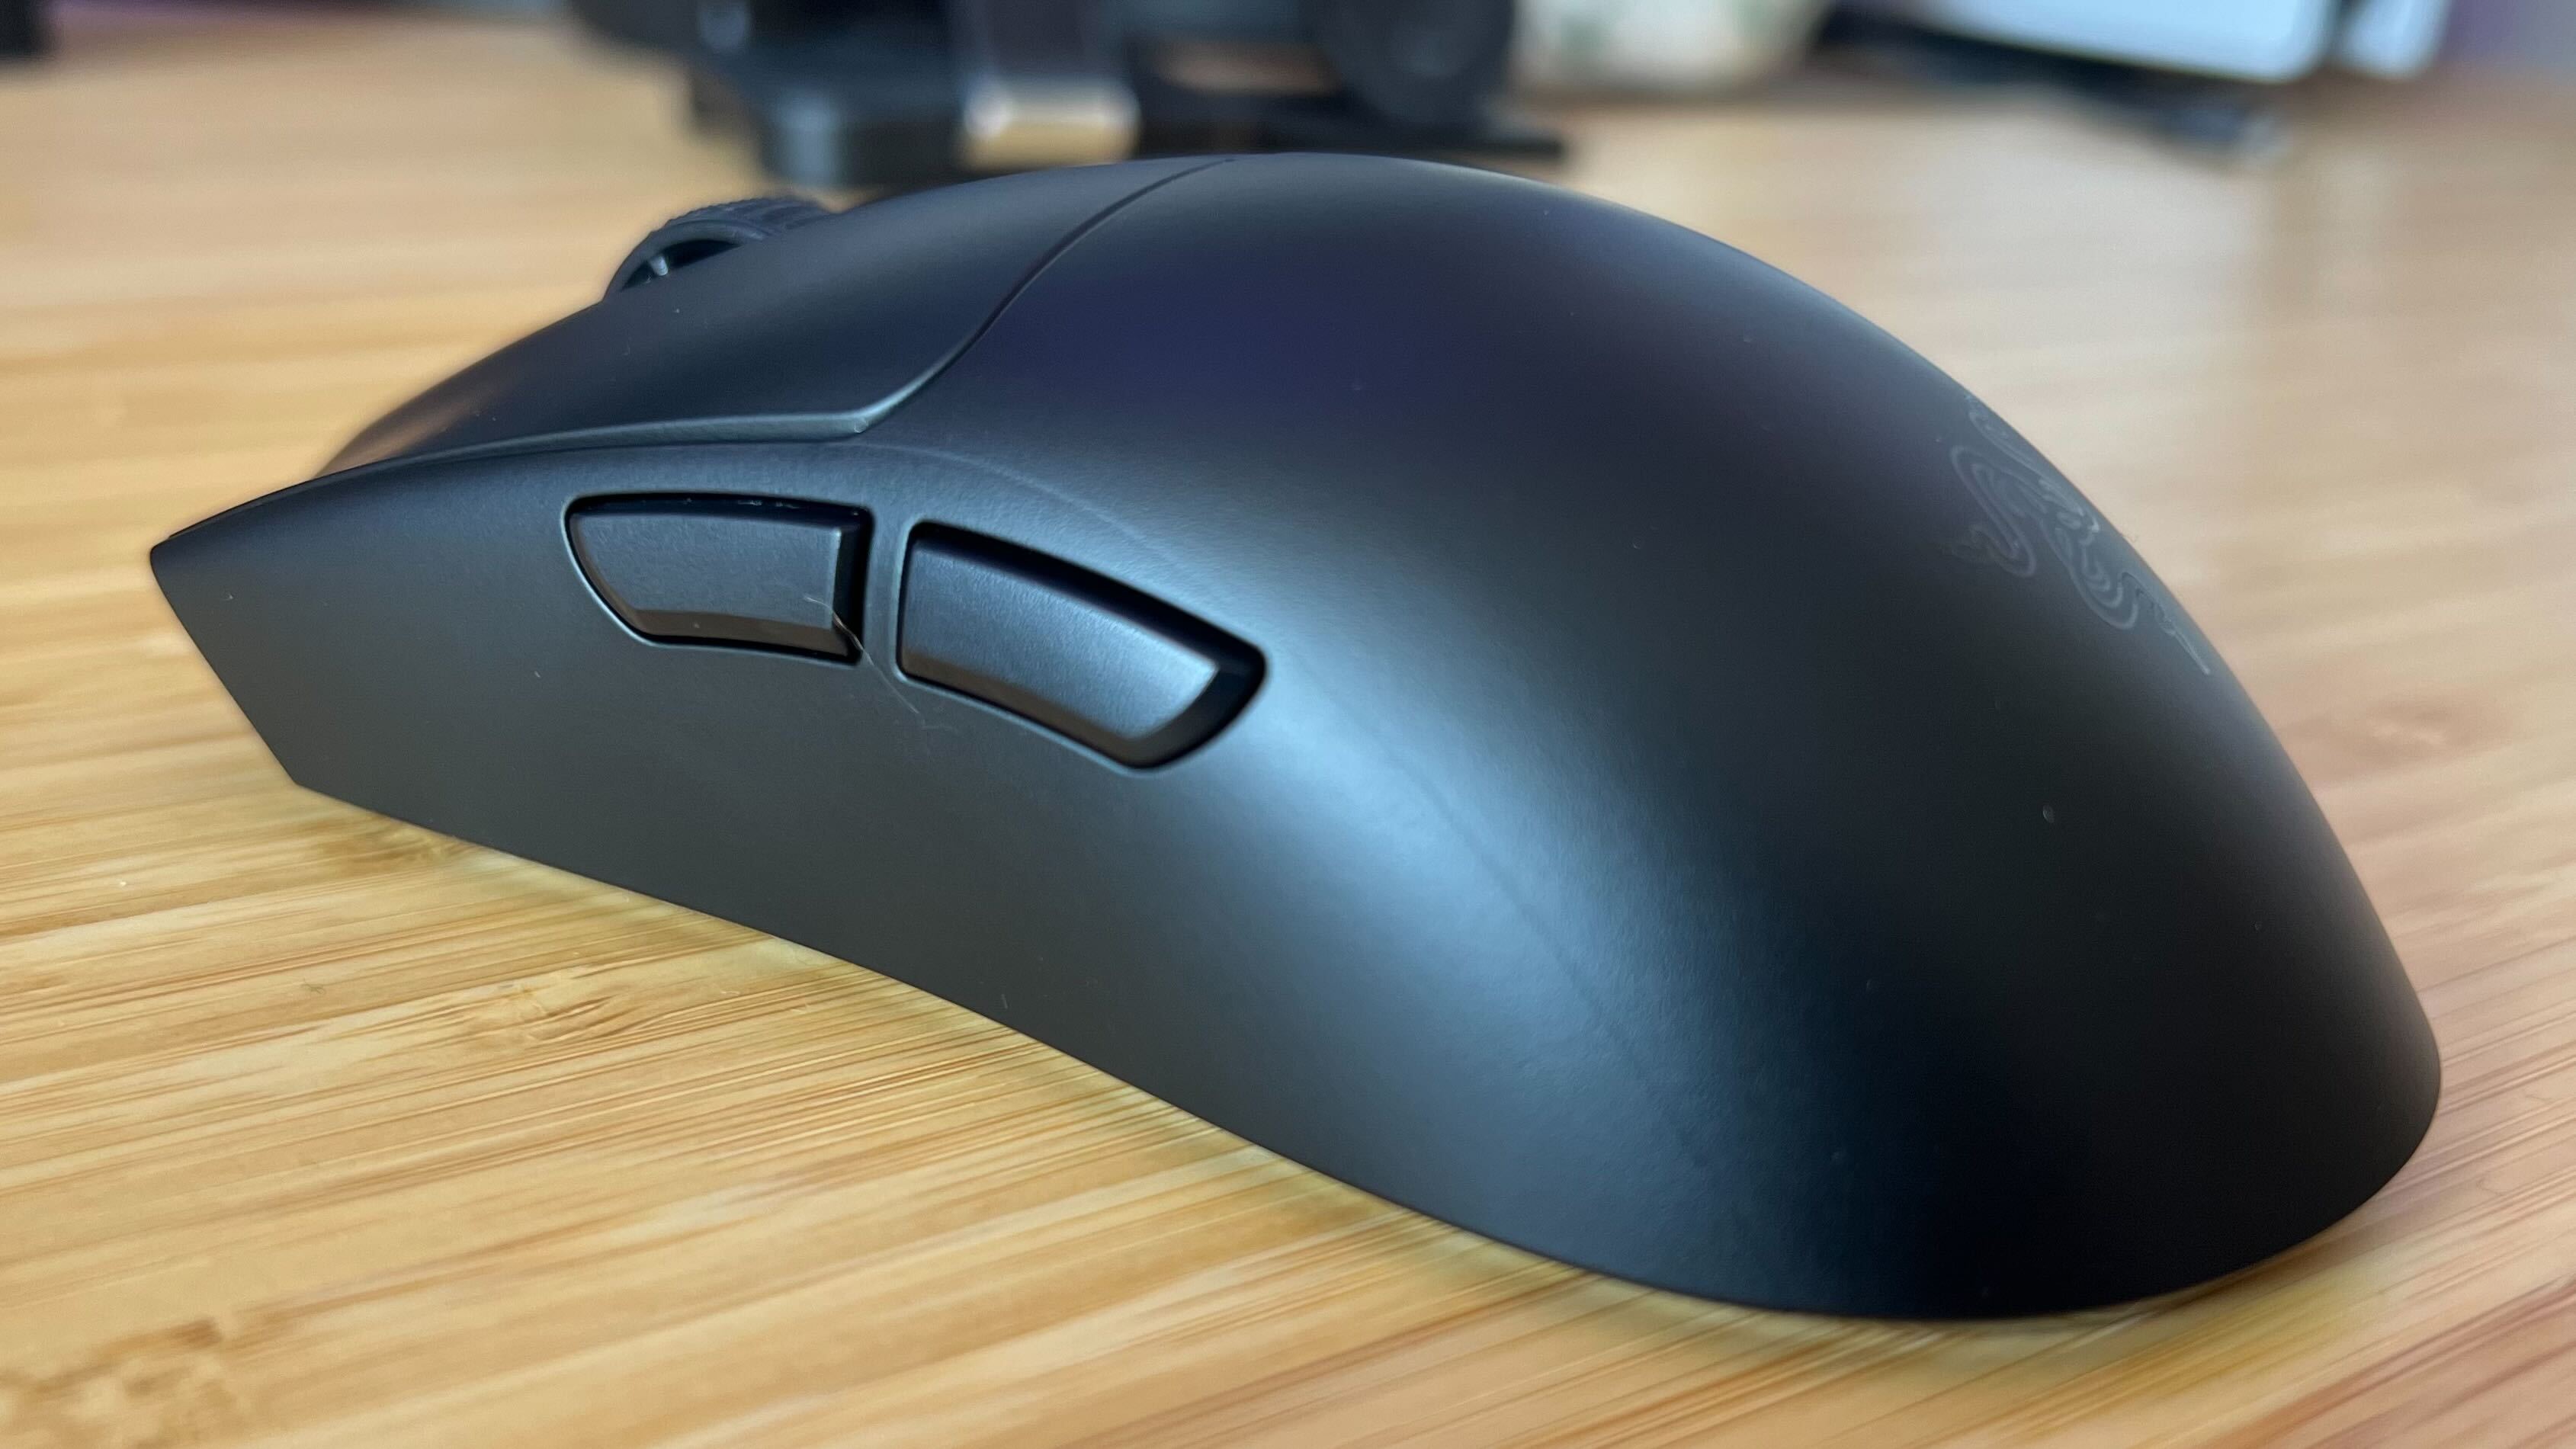 Left side of Razer Viper V3 Pro gaming mouse showing side buttons and shape of thumb groove